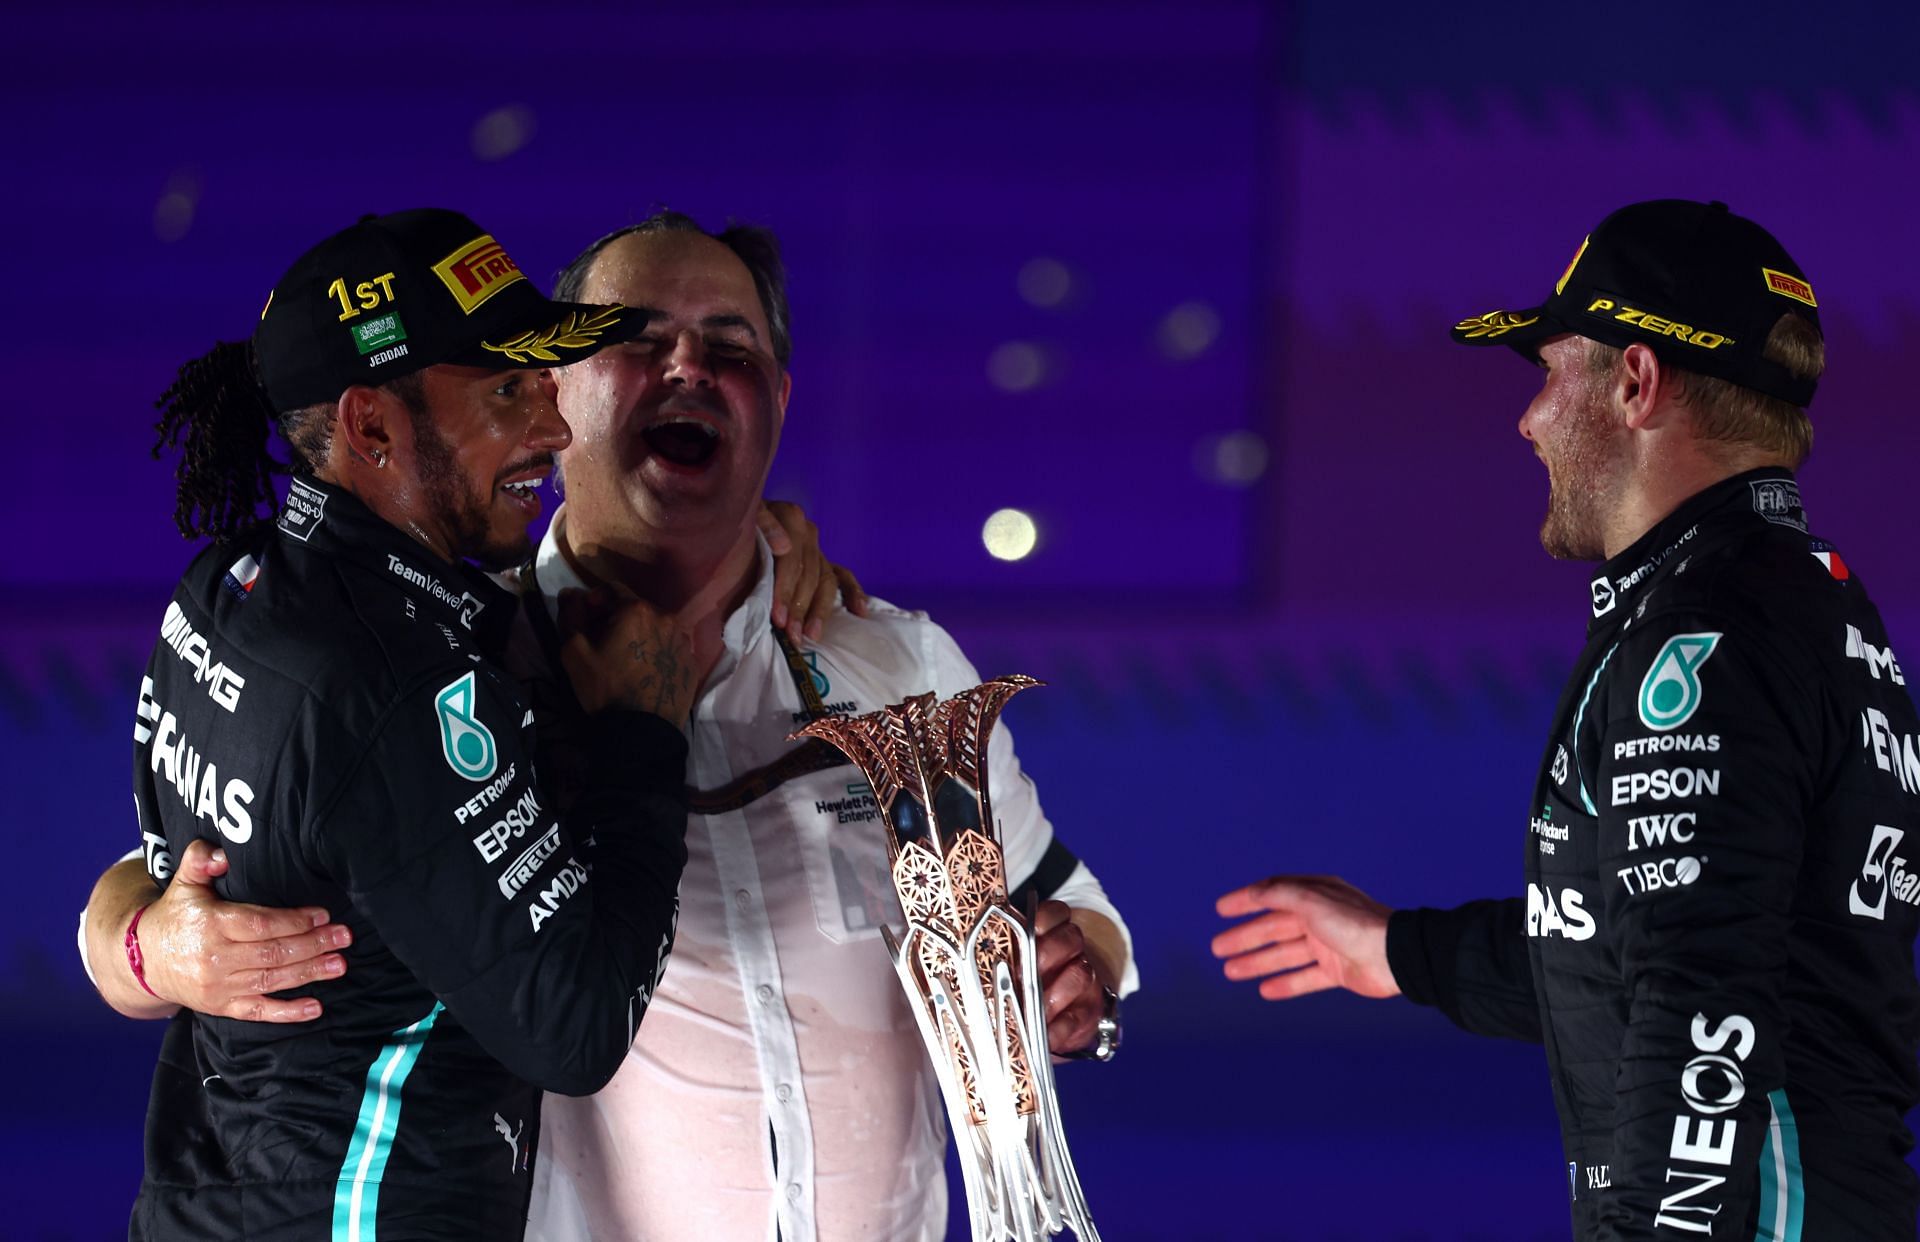 Lewis Hamilton was able to secure a crucial win at the Saudi Arabian Grand Prix